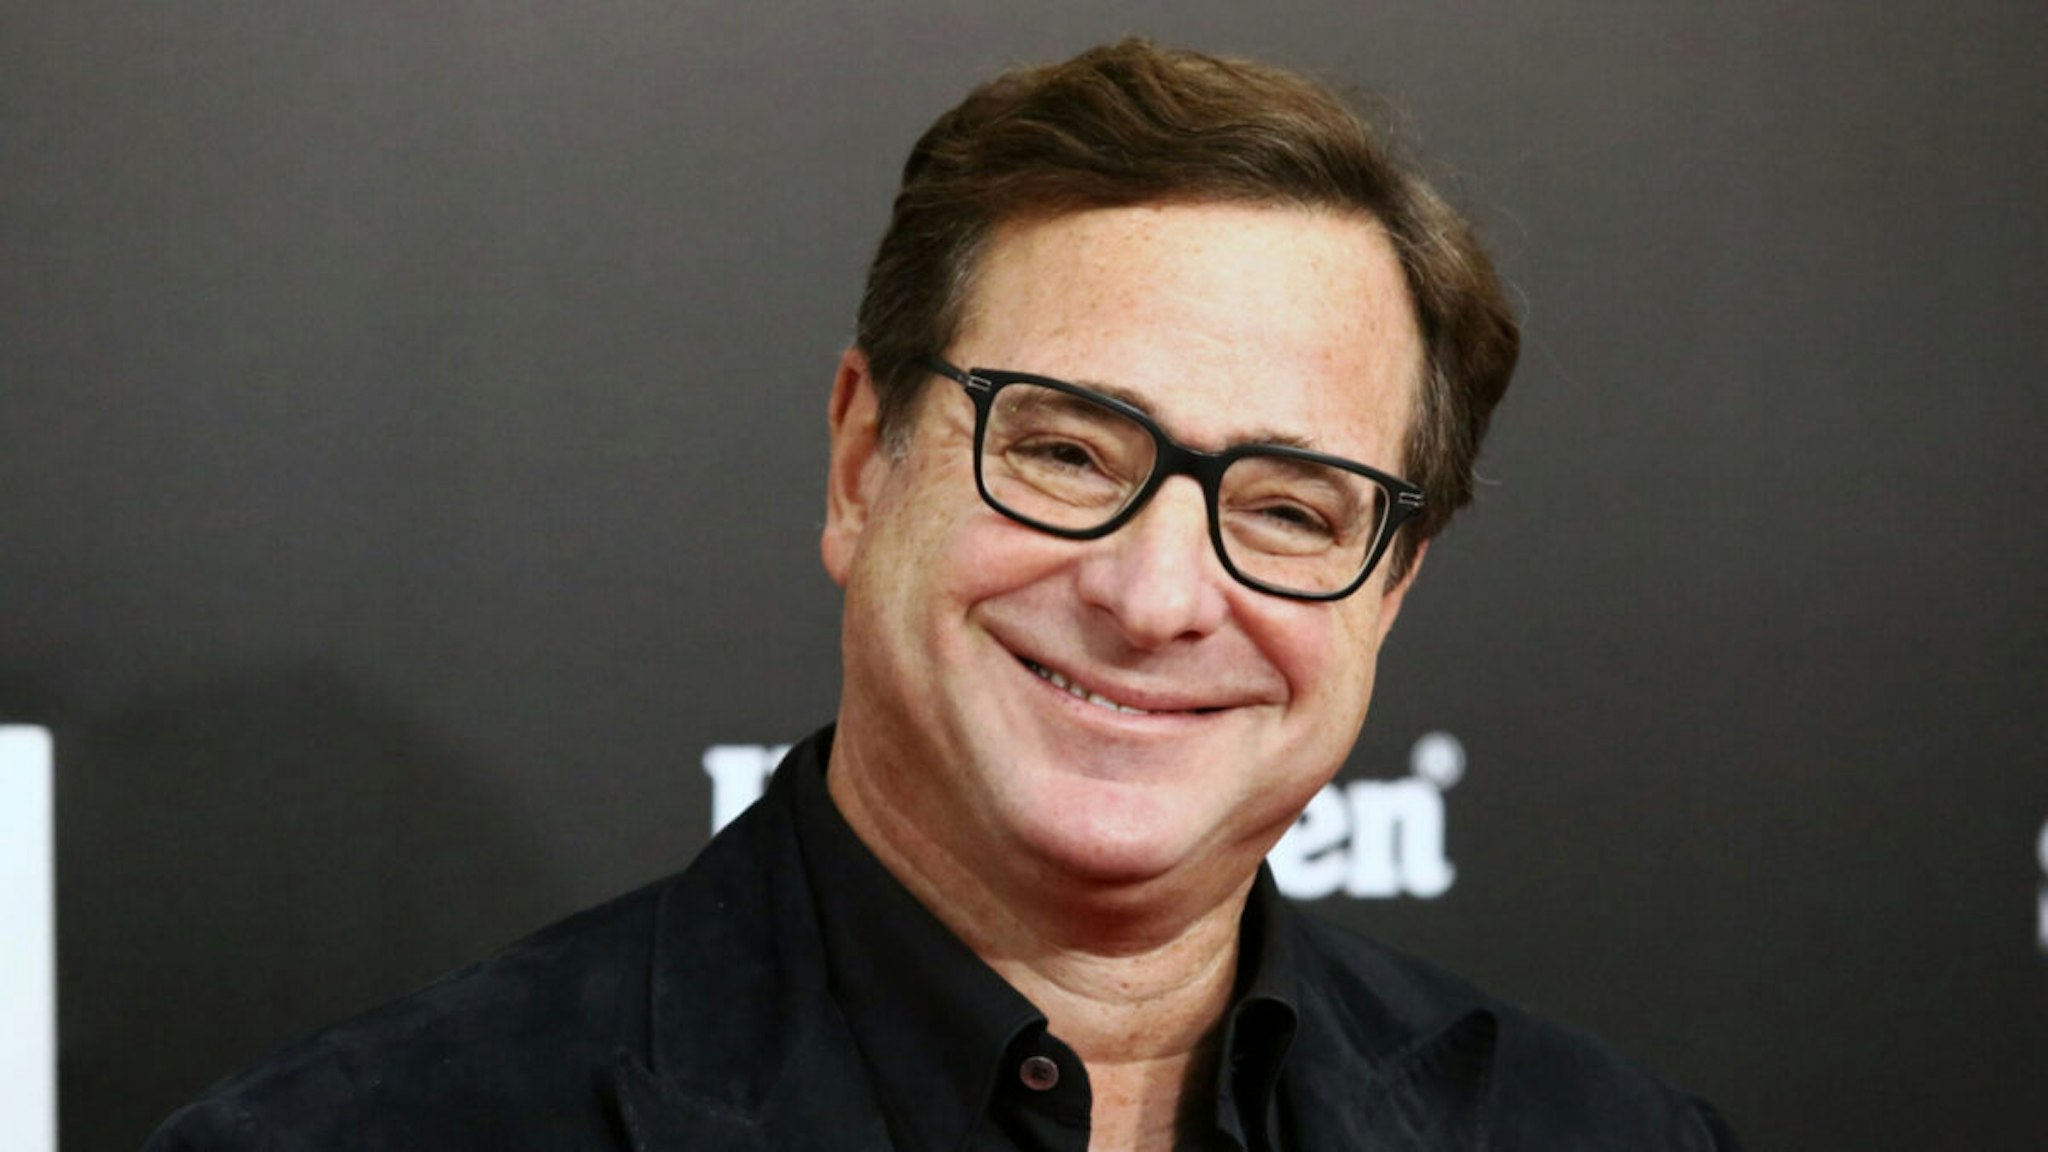 Actor Bob Saget attends "The Big Short" New York premiere at Ziegfeld Theater on November 23, 2015 in New York City.